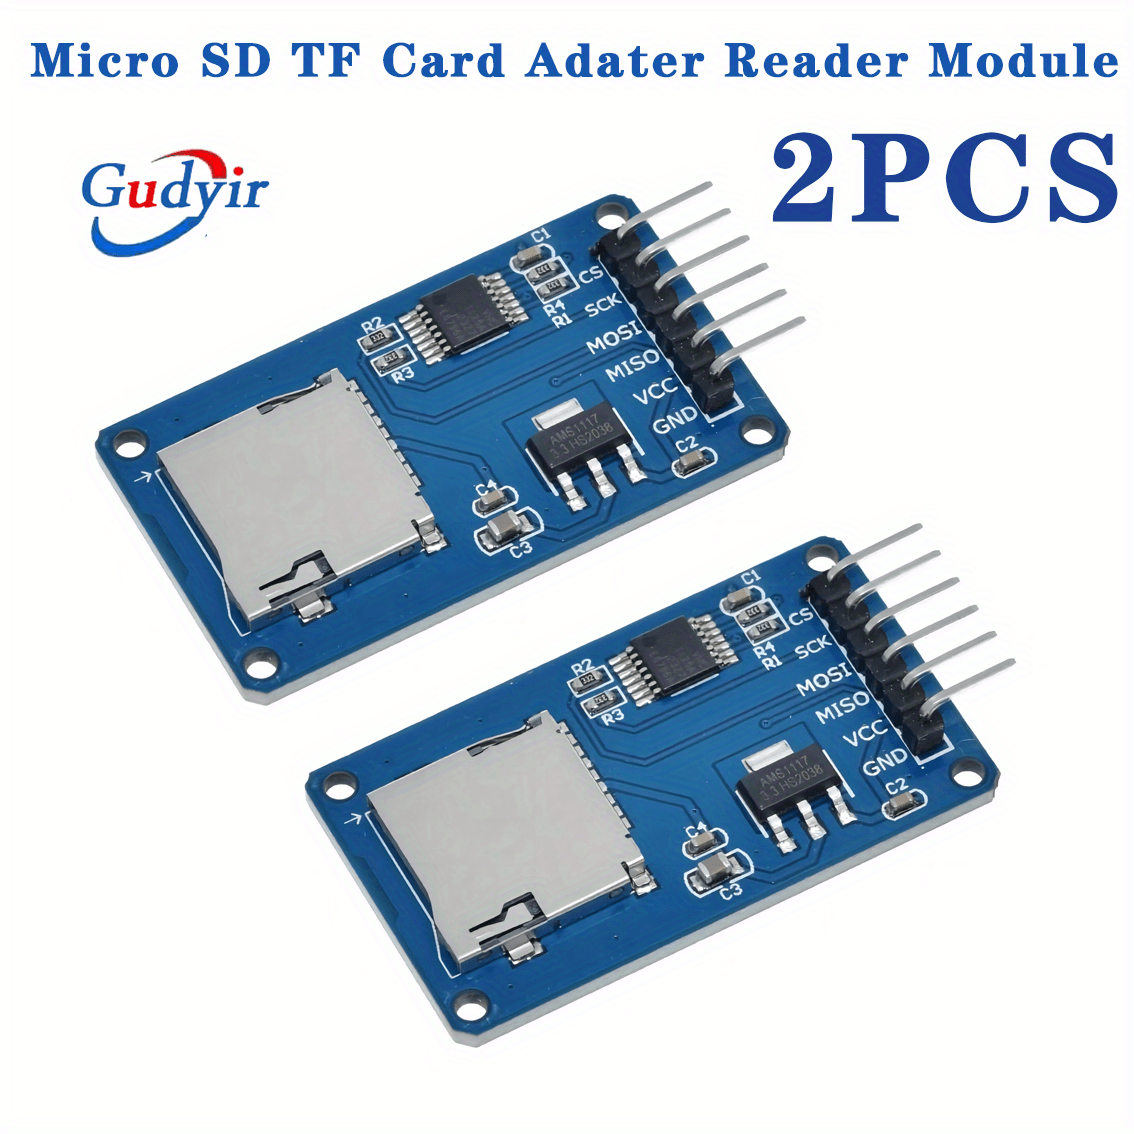 2pcs Micro SD TF Card Adater Reader Module 6Pin SPI Interface Driver Module  With Chip Level Conversion For Arduino With SPI Interface Level Conversion